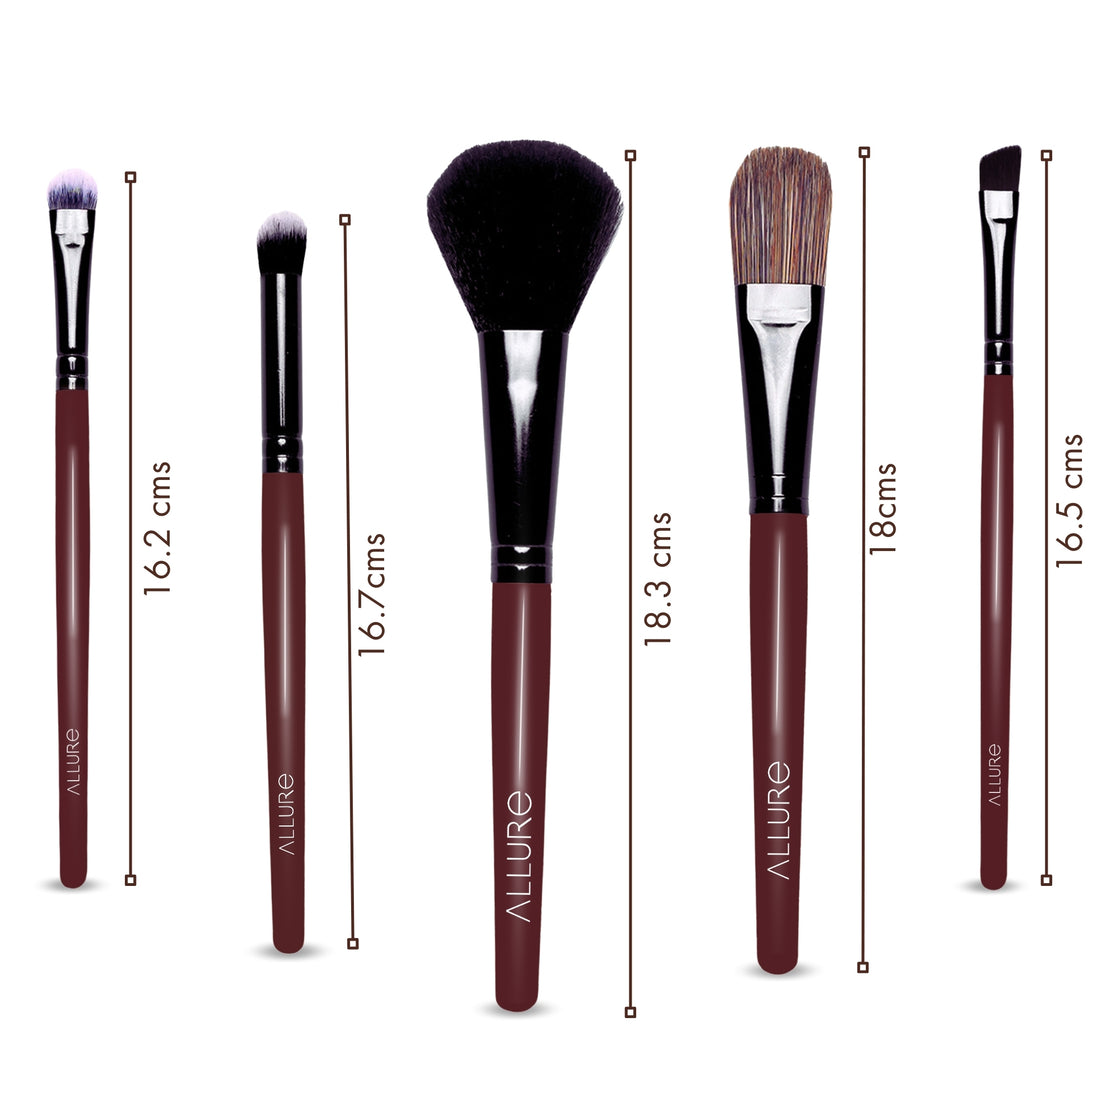 Allure Set Of 5 Makeup Brushes (MBS -C5)